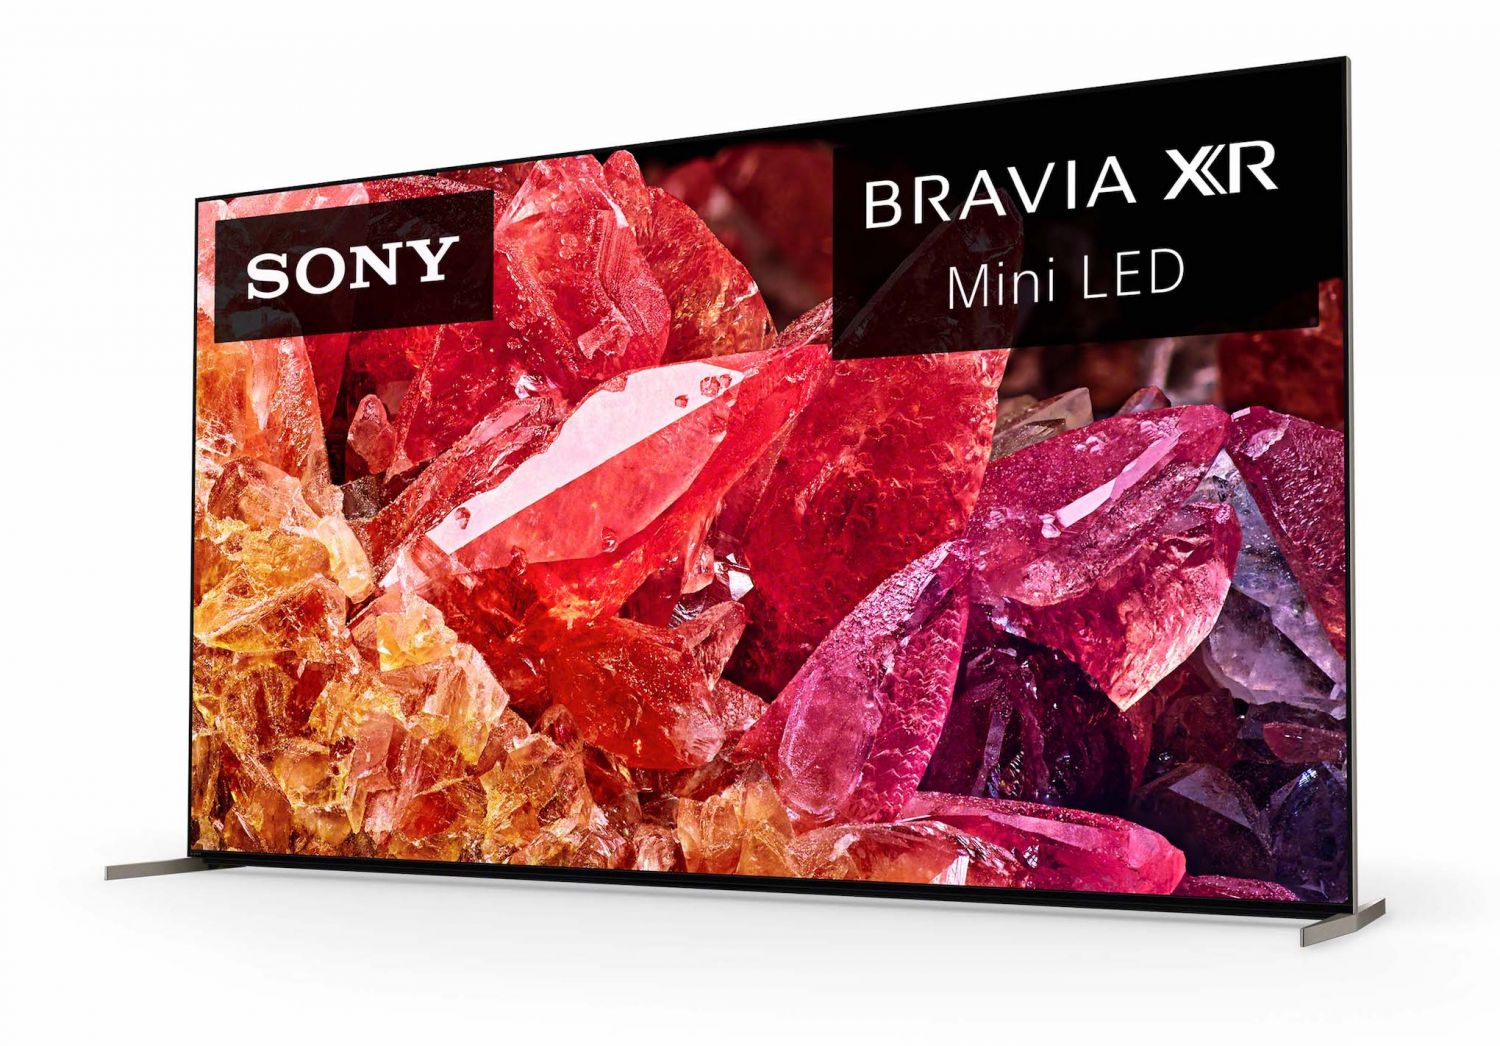 Sony Reveals World's First QDOLED 4K TV; Optimized For The PlayStation